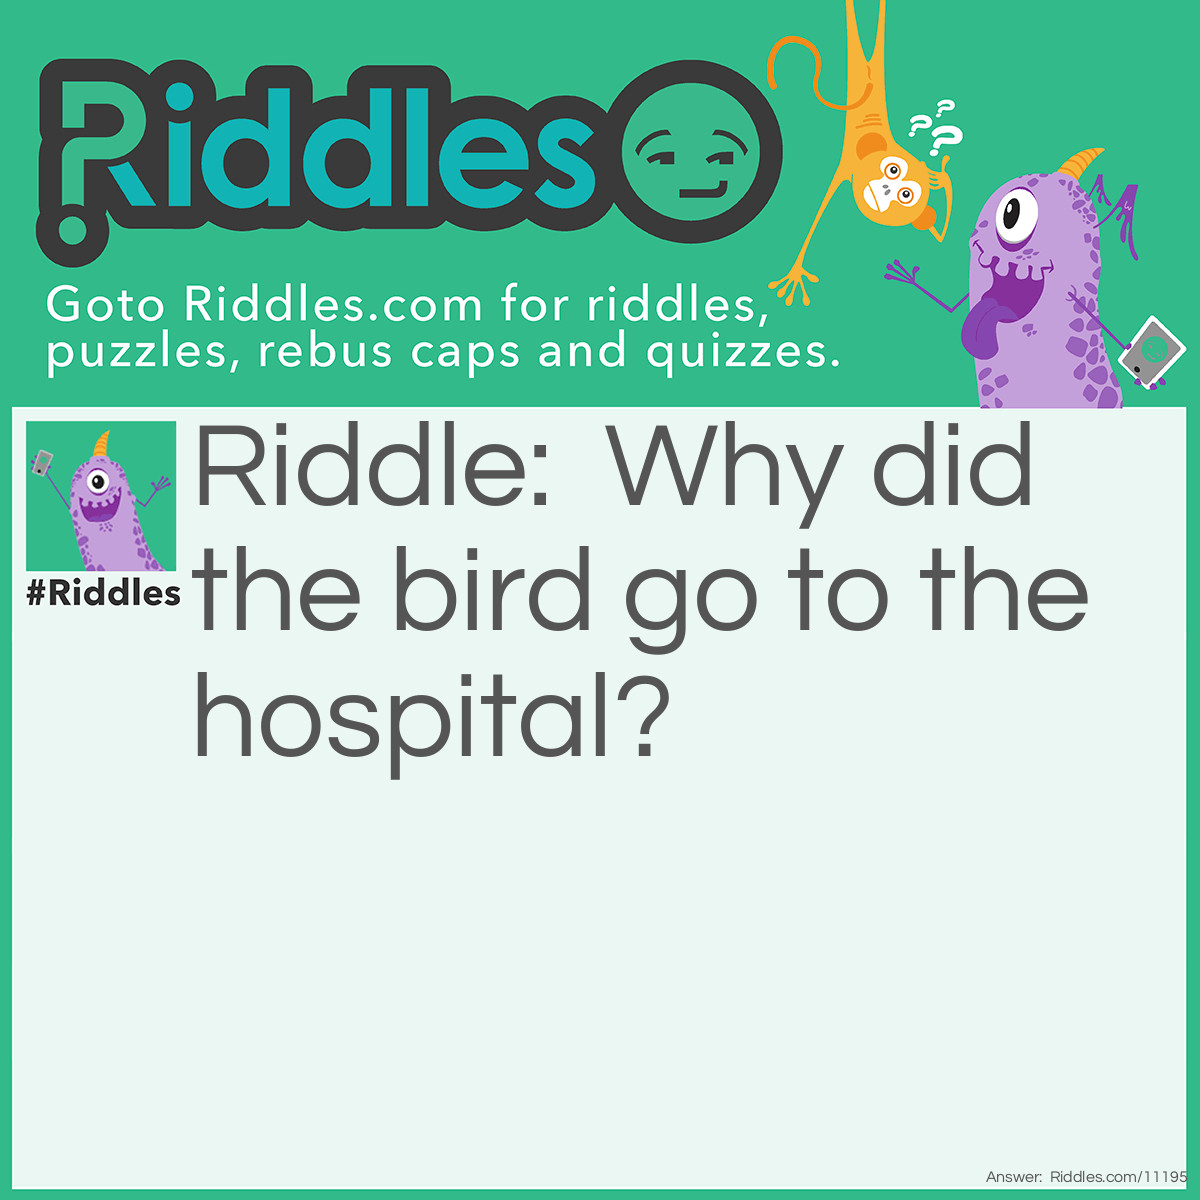 Riddle: Why did the bird go to the hospital? Answer: For the tweet-ment!